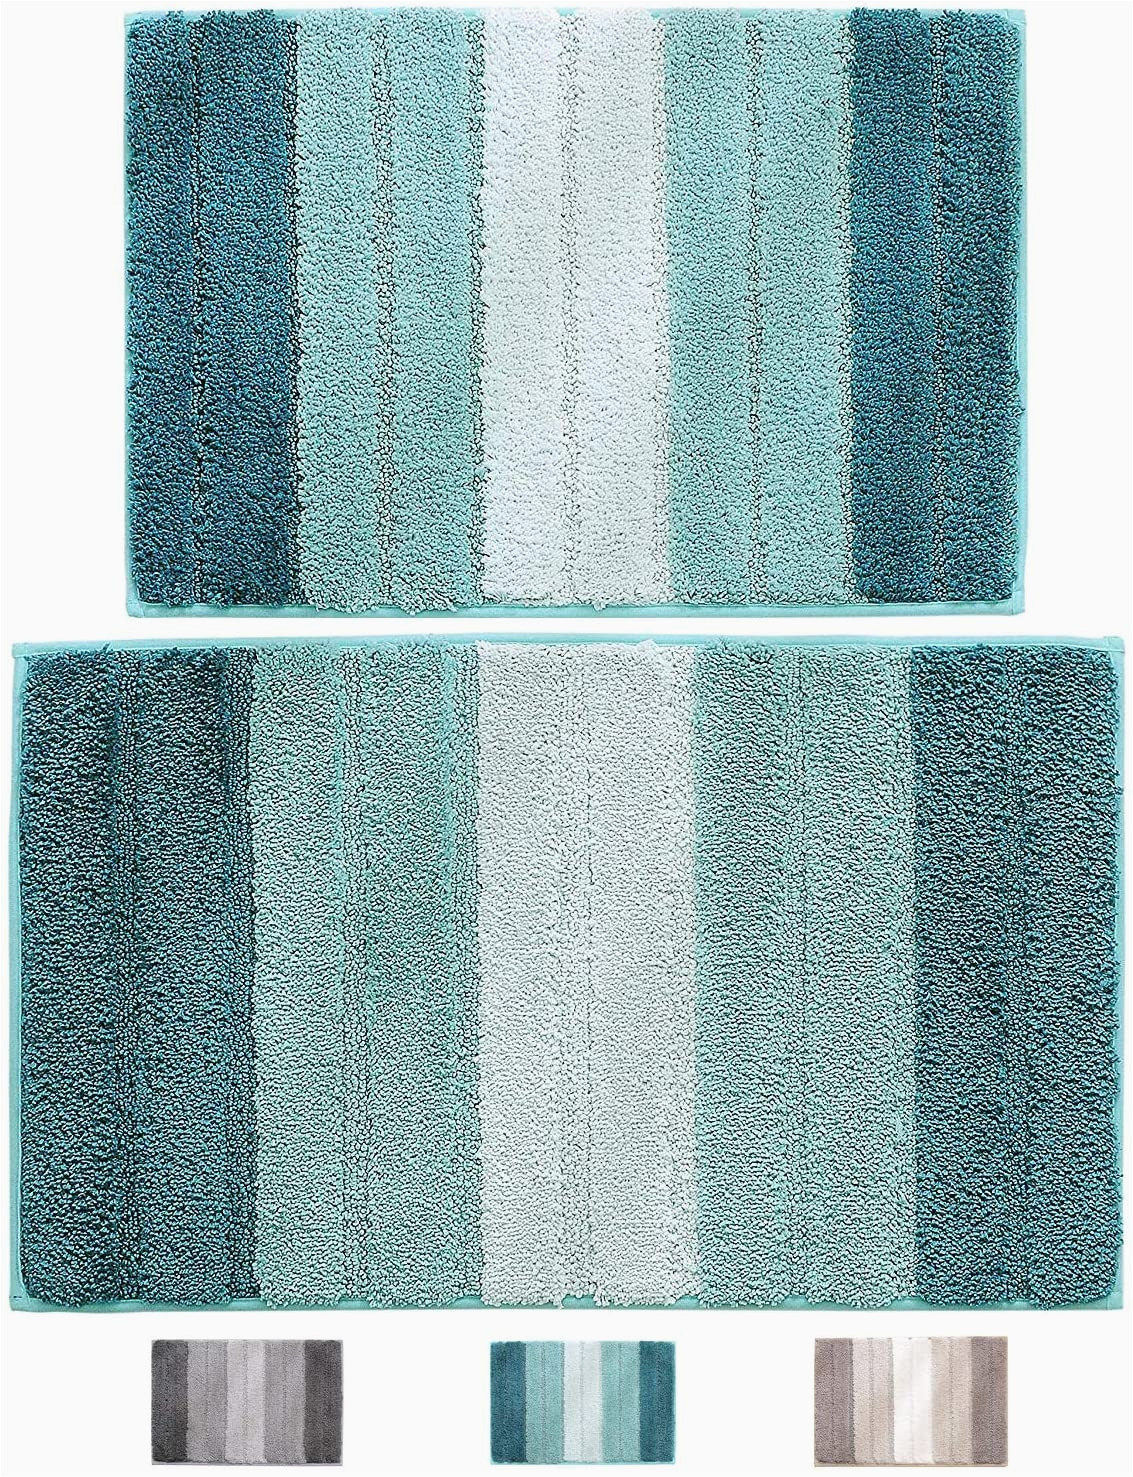 Bath Rugs that Absorb Water Wovwvool Bathroom Rugs Plush Mat Polyester Microfiber Non Slipsoftabsorbent and Machine 20a32 and 18a26 Aqua Greeni¼